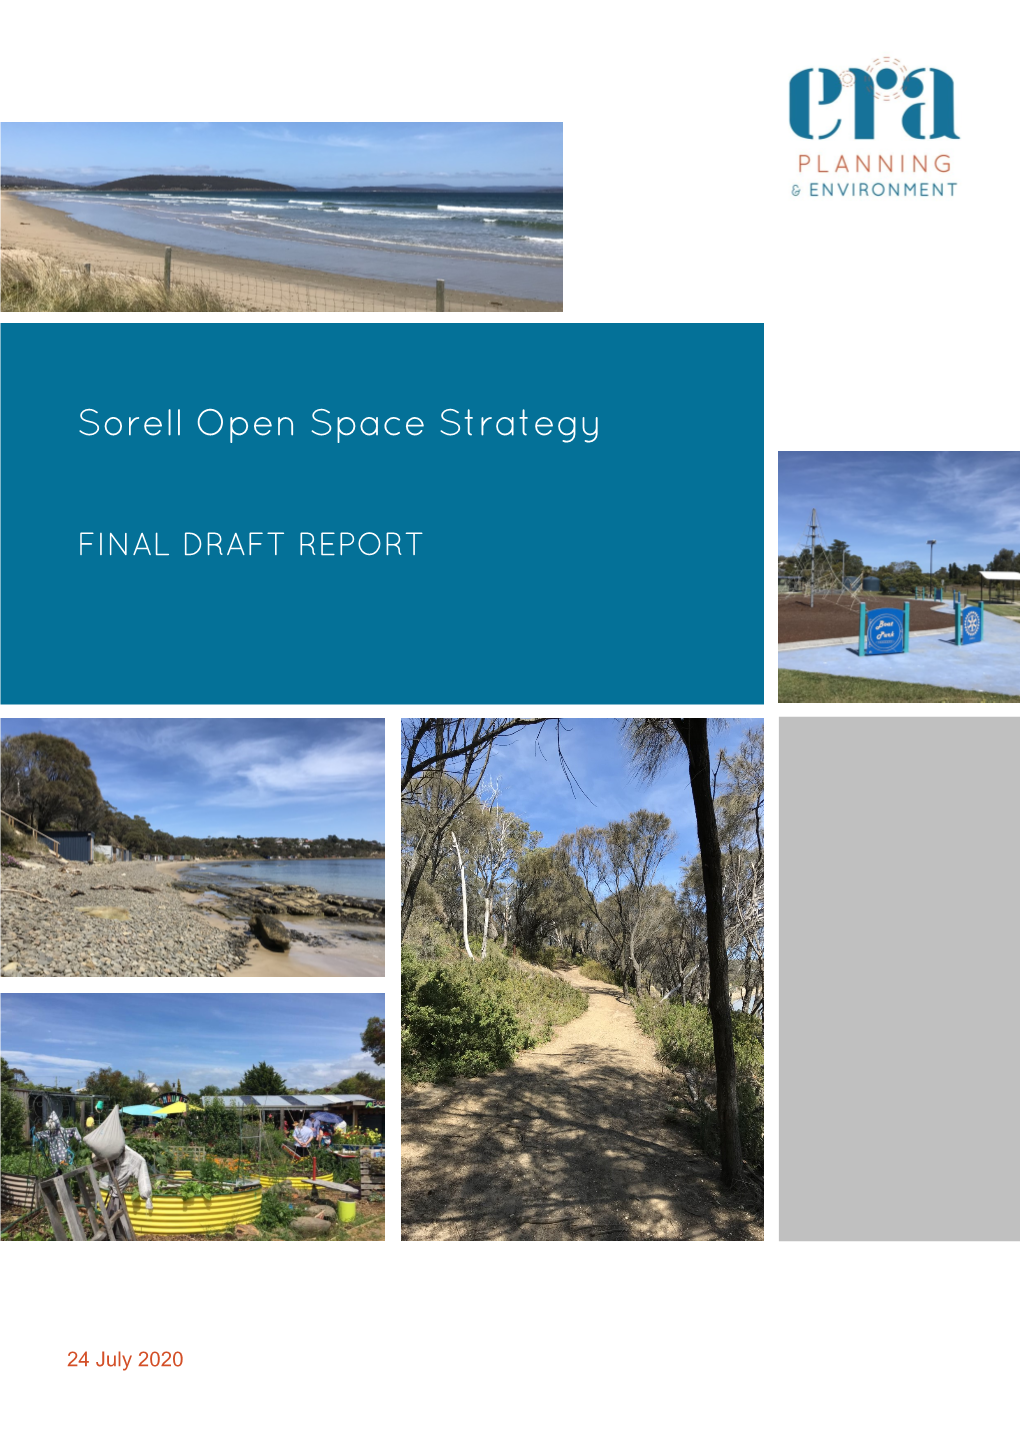 Sorell Open Space Strategy